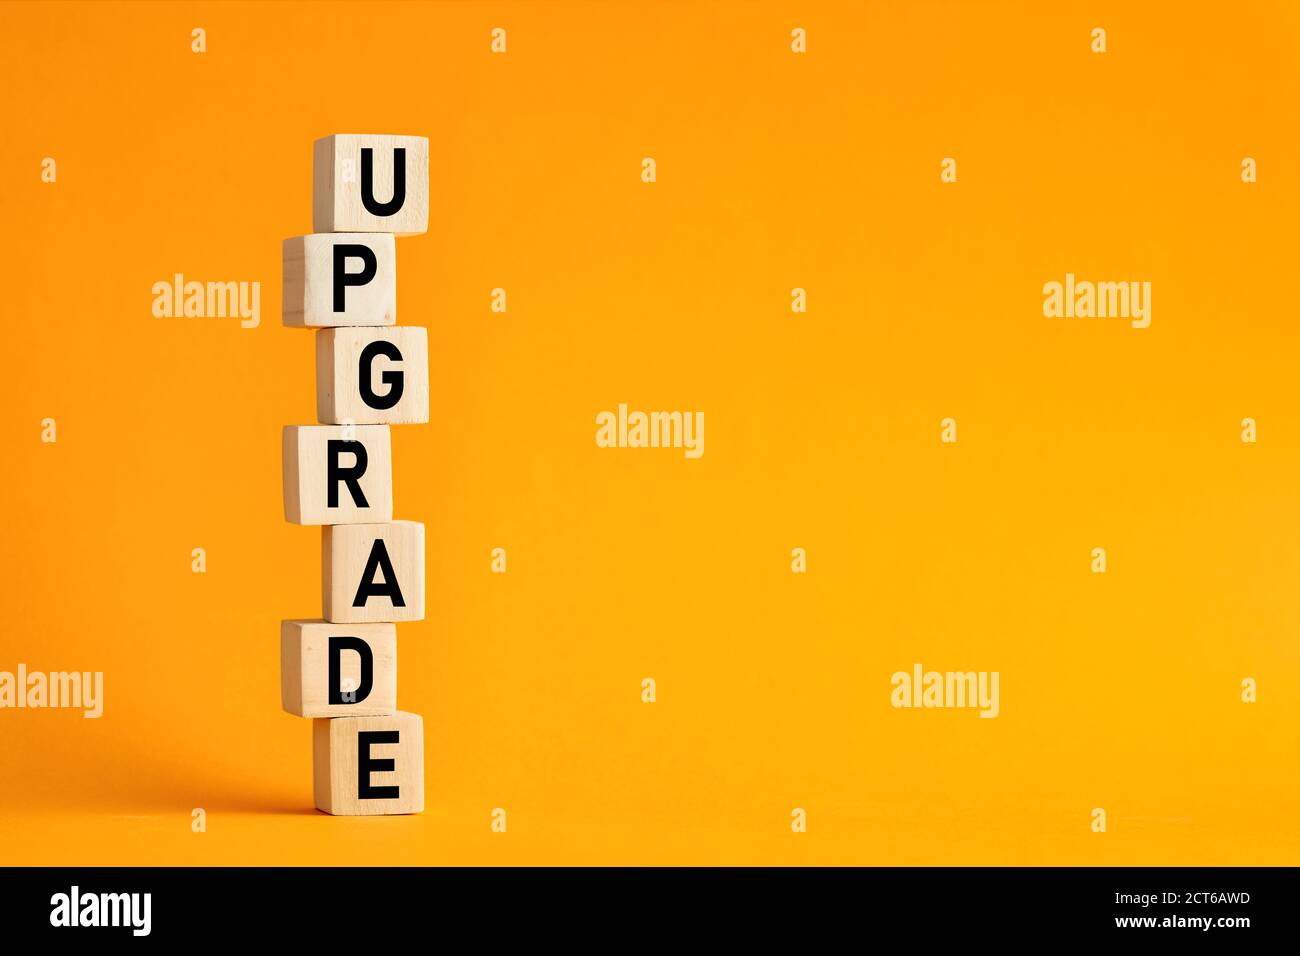 The word upgrade on wooden cubes against yellow background. Computer, network, internet business technology upgrade concept. Stock Photo